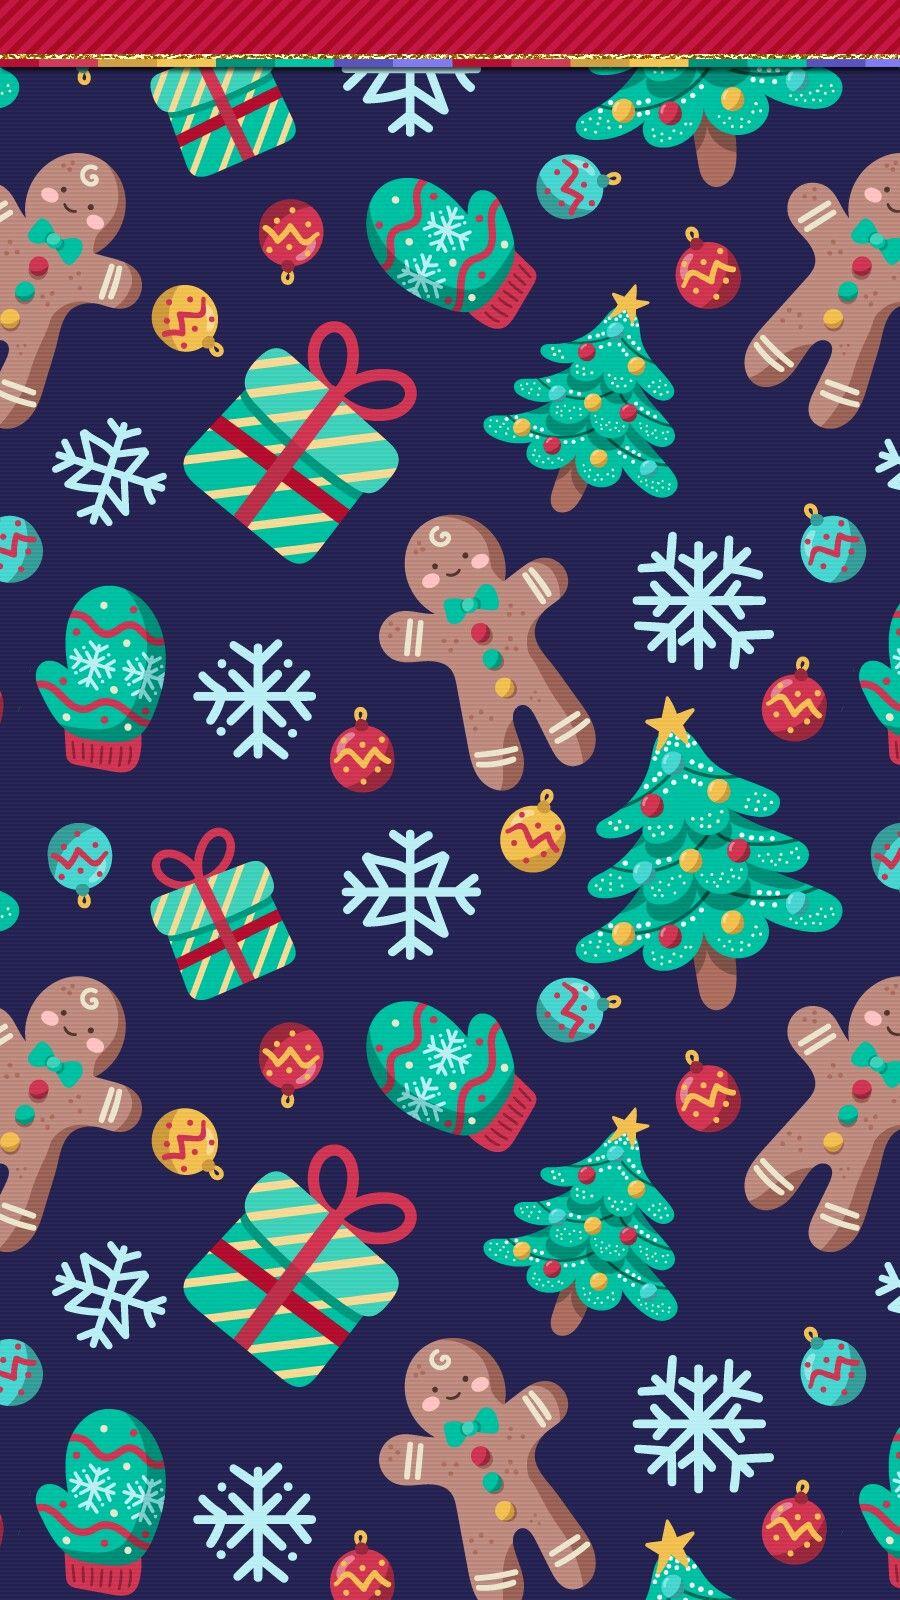 android gingerbread wallpaper